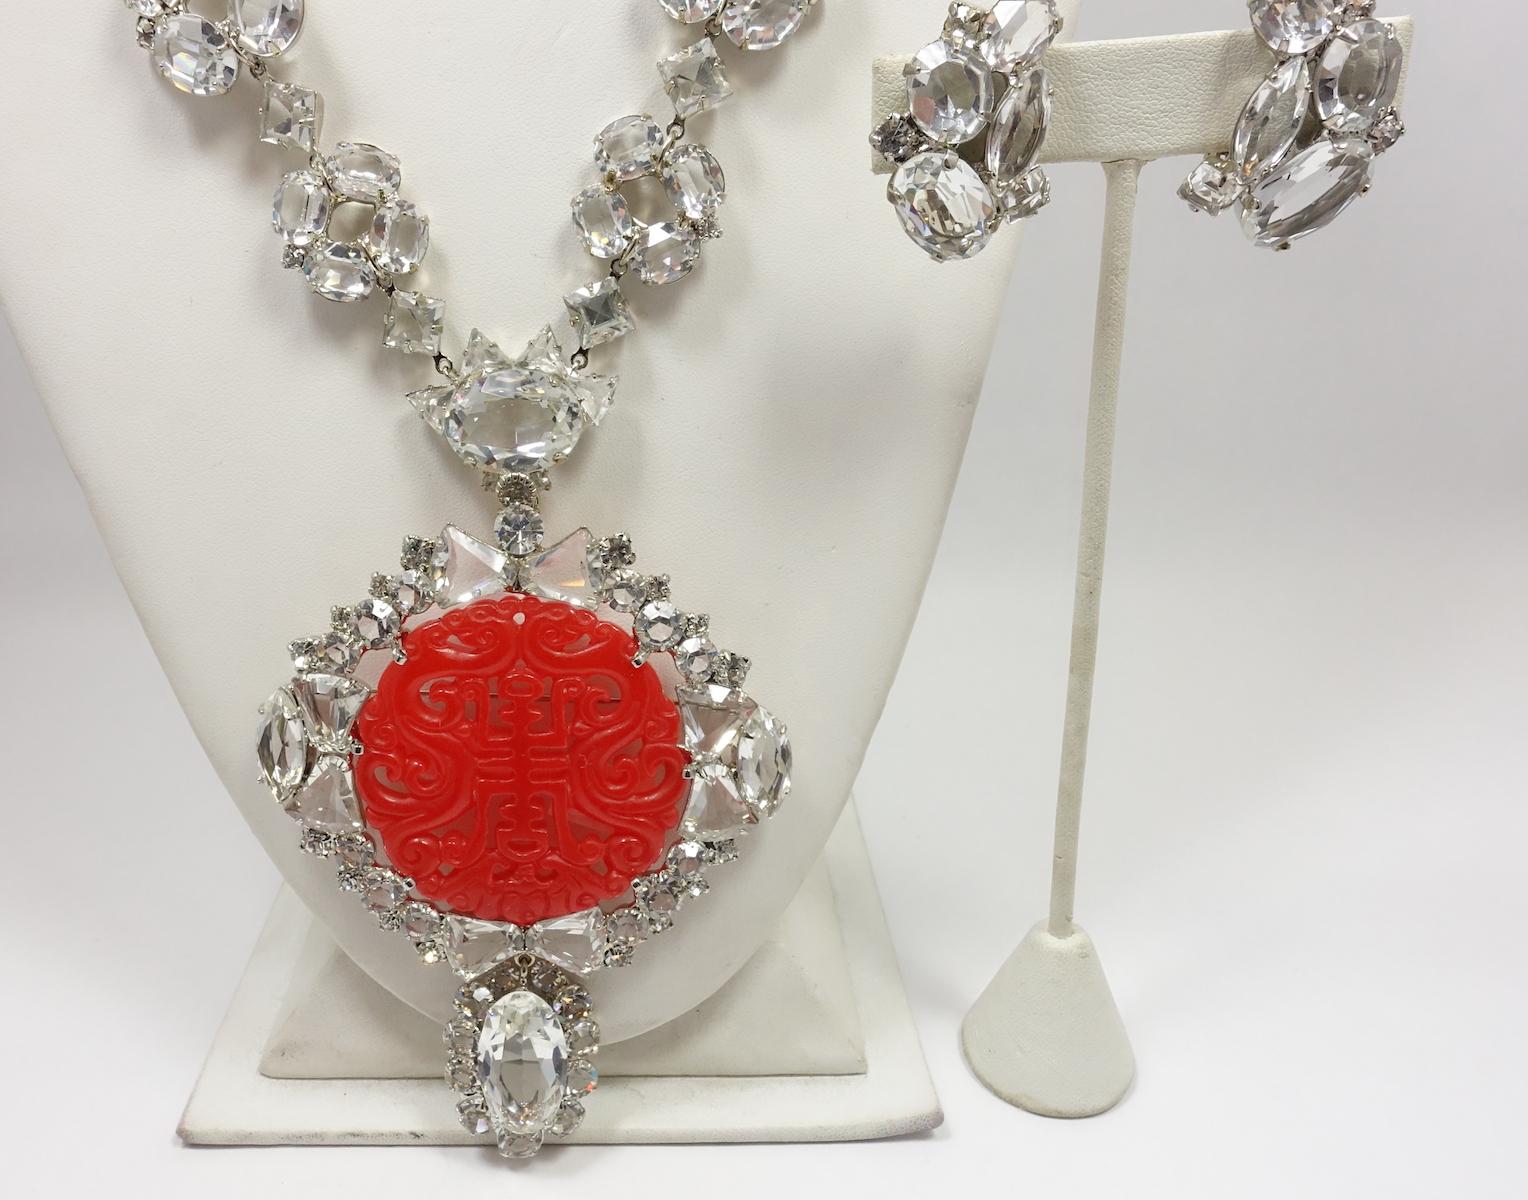 This one-of-a-kind versatile necklace set by Robert Sorrell featuring a red Asian theme as the centerpiece.  The centerpiece can separate from the crystal necklace and can be worn as a brooch.  Brilliant crystals surround the centerpiece in a silver